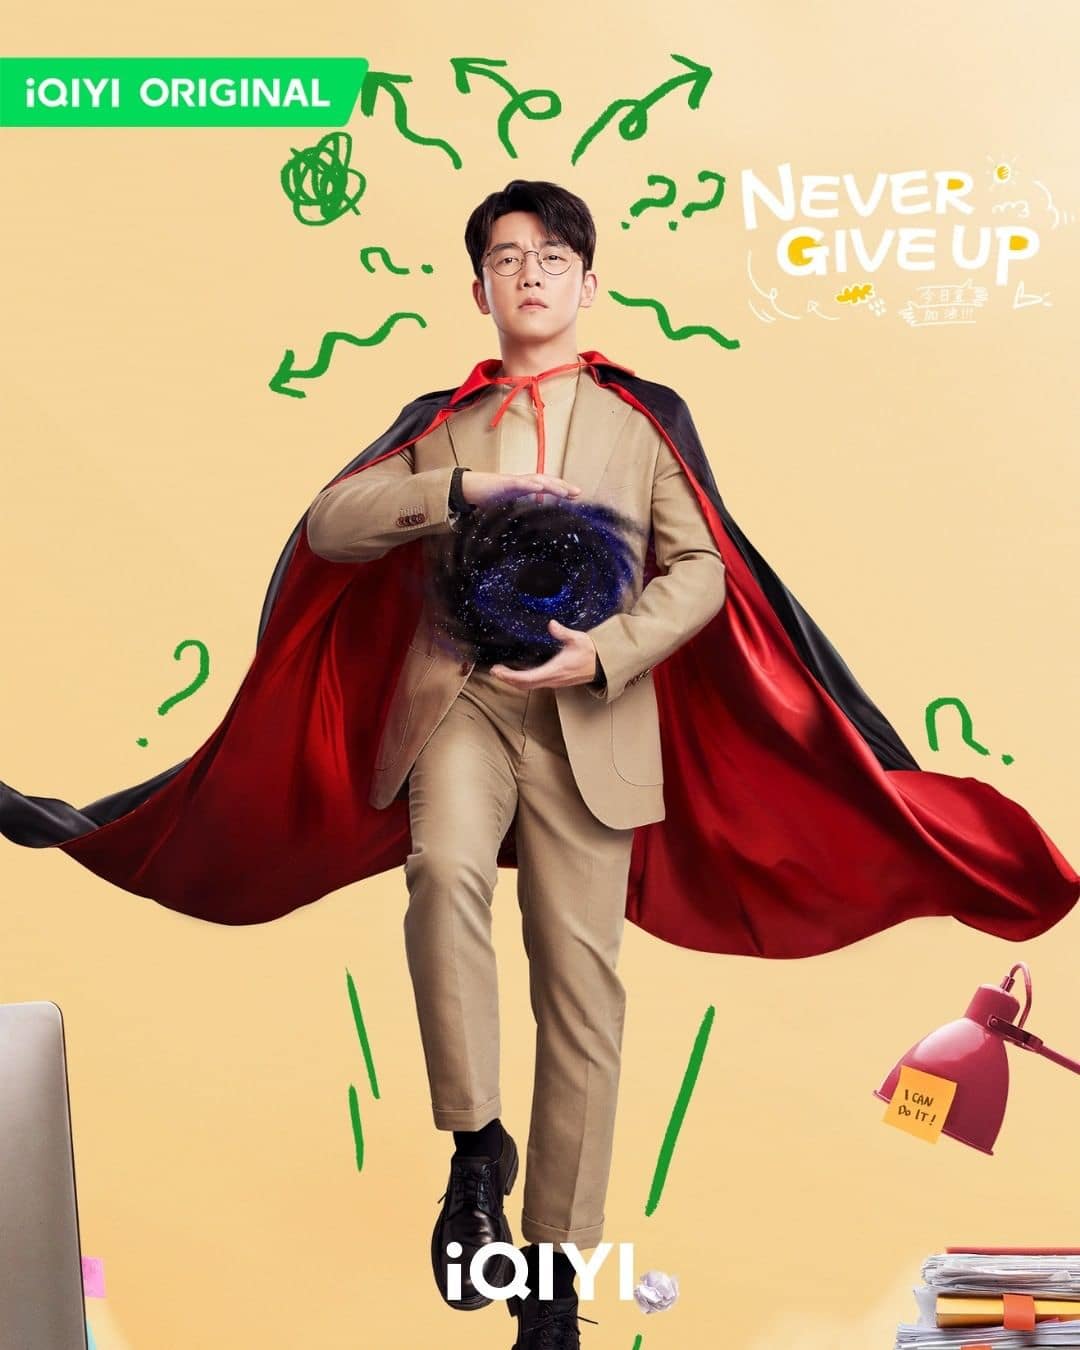 Never Give Up - Sinopsis, Pemain, OST, Episode, Review